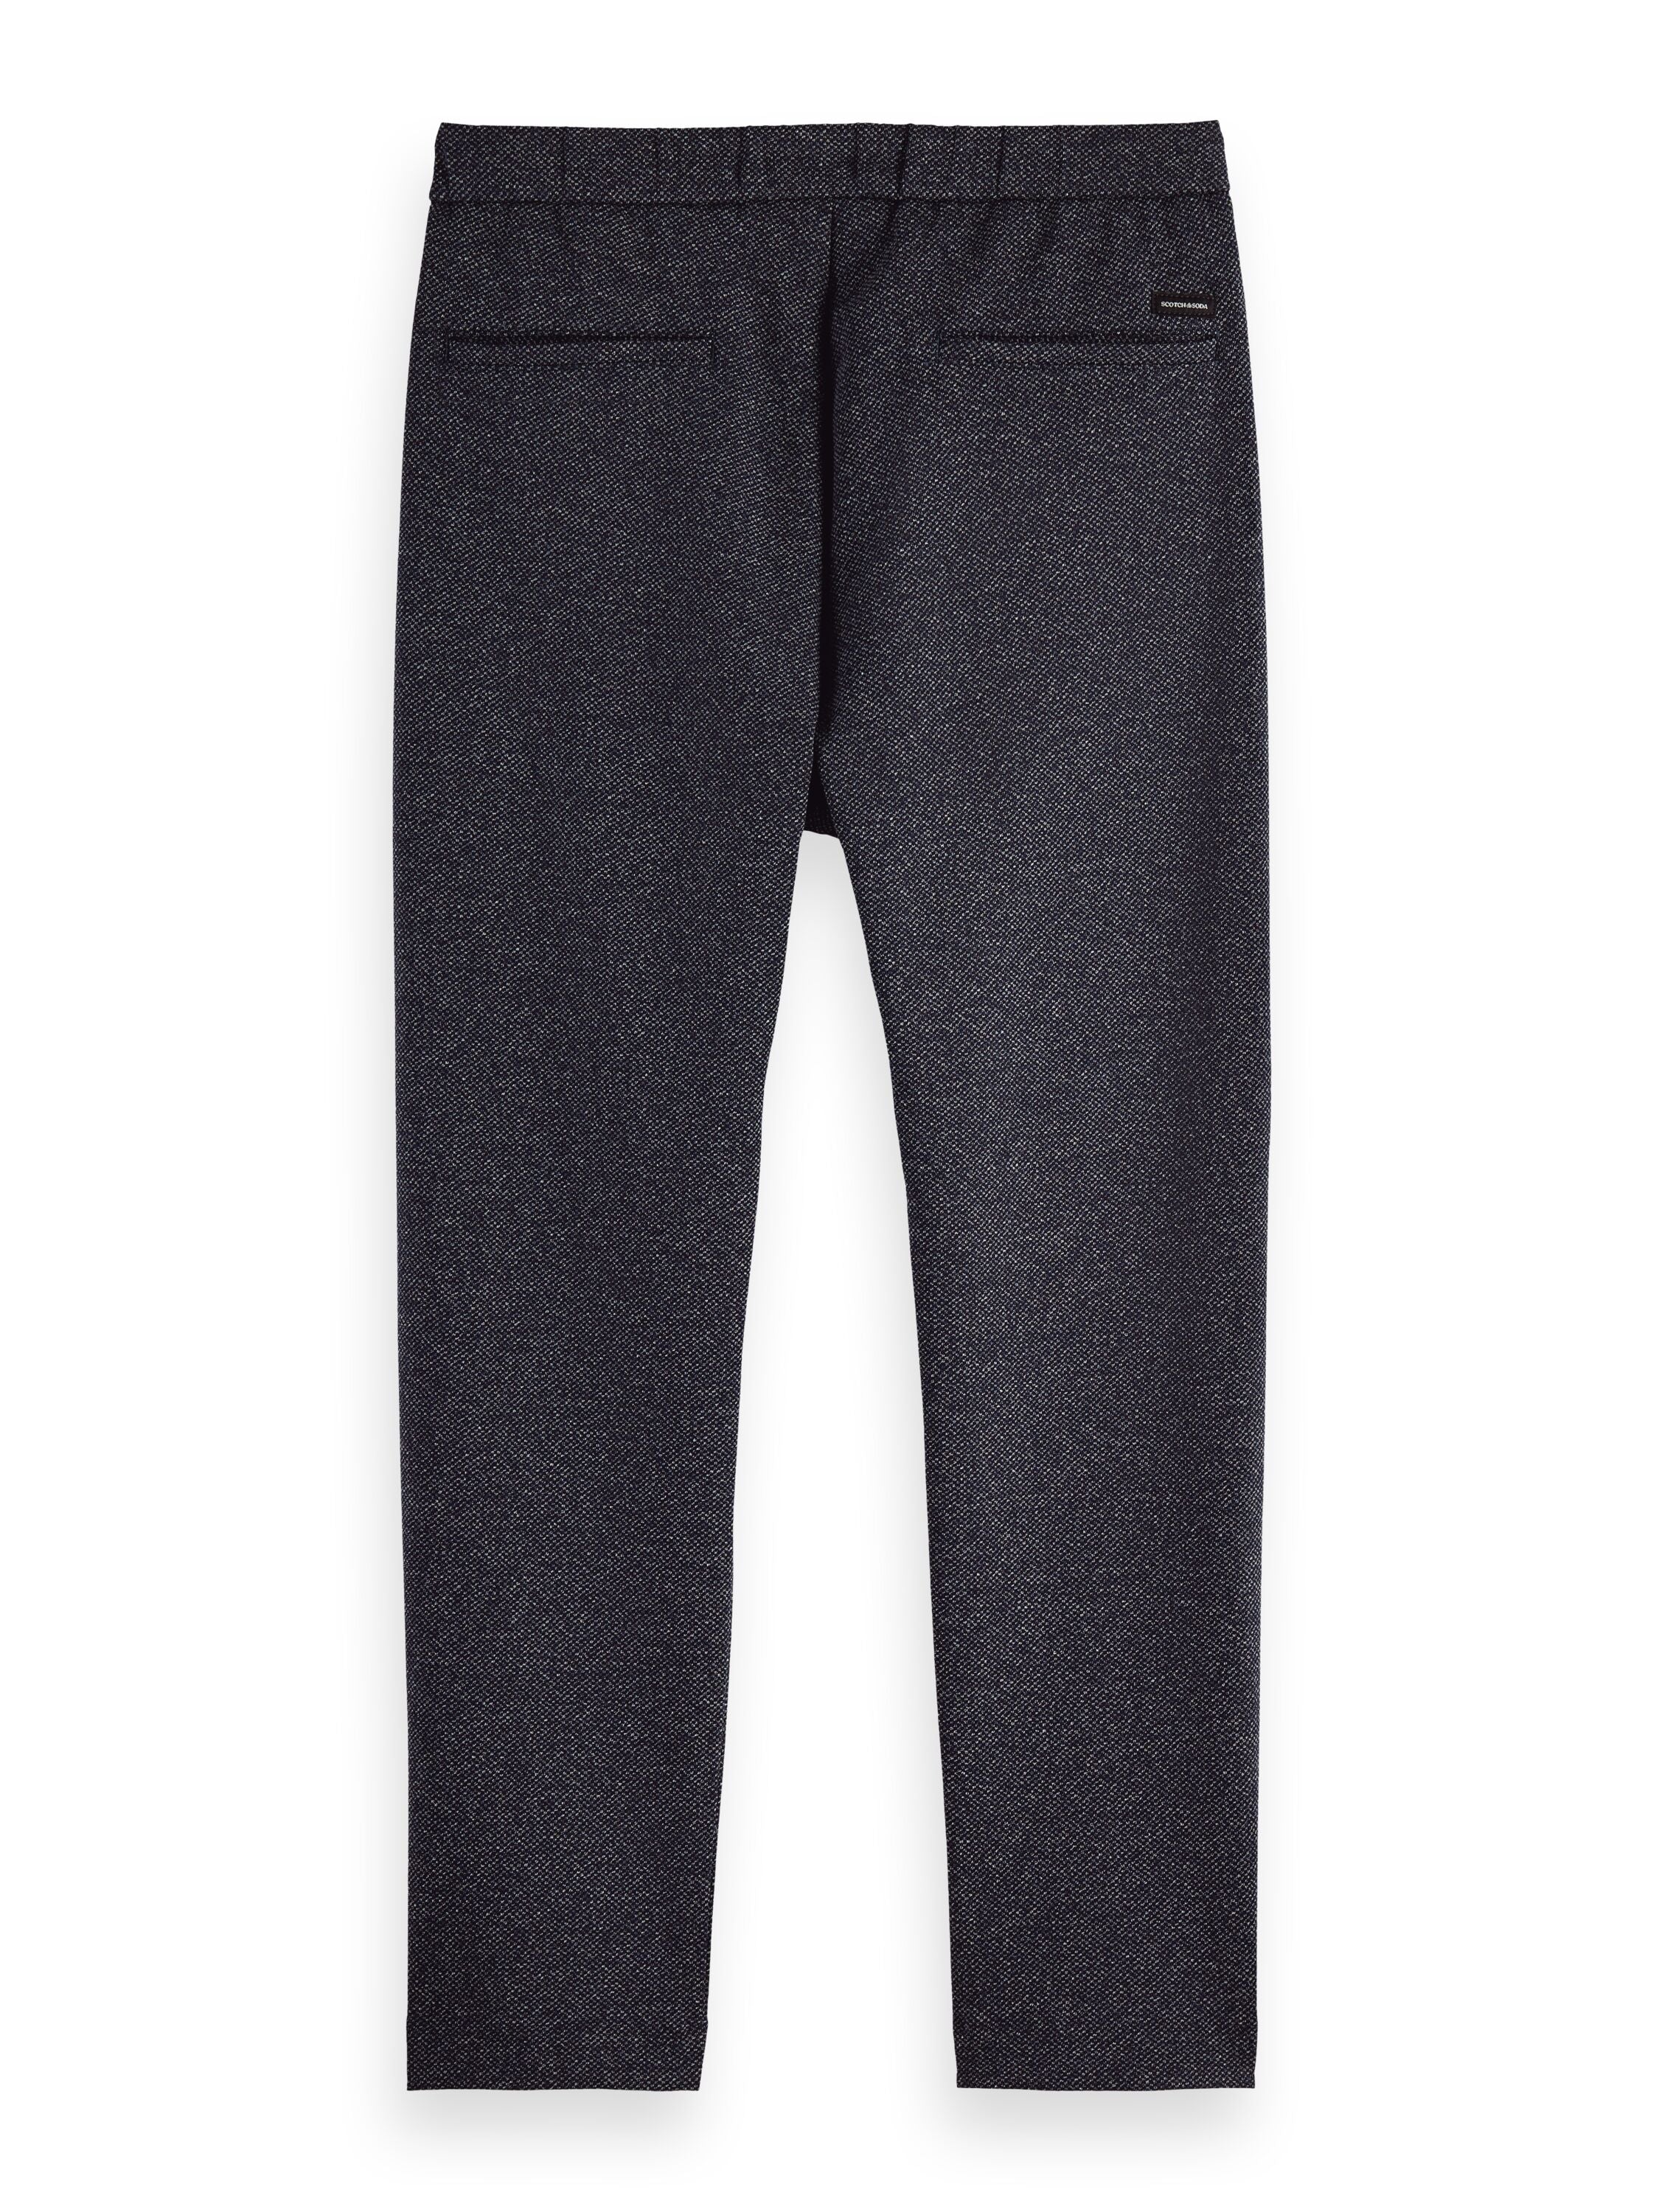 Formal pant with half elasticated wb